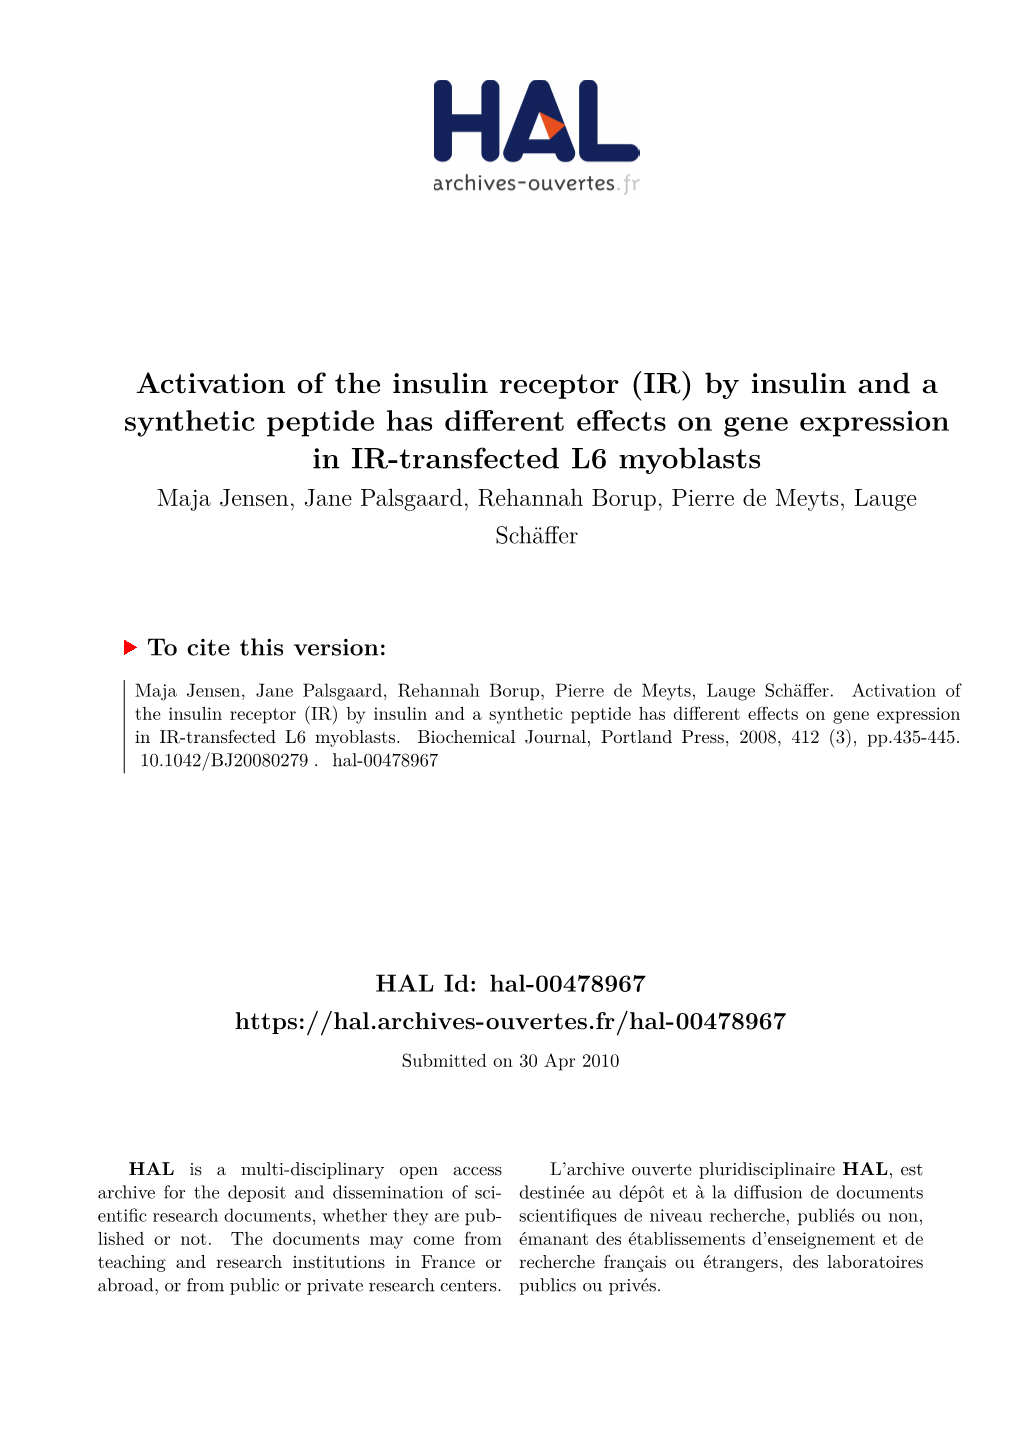 Activation of the Insulin Receptor